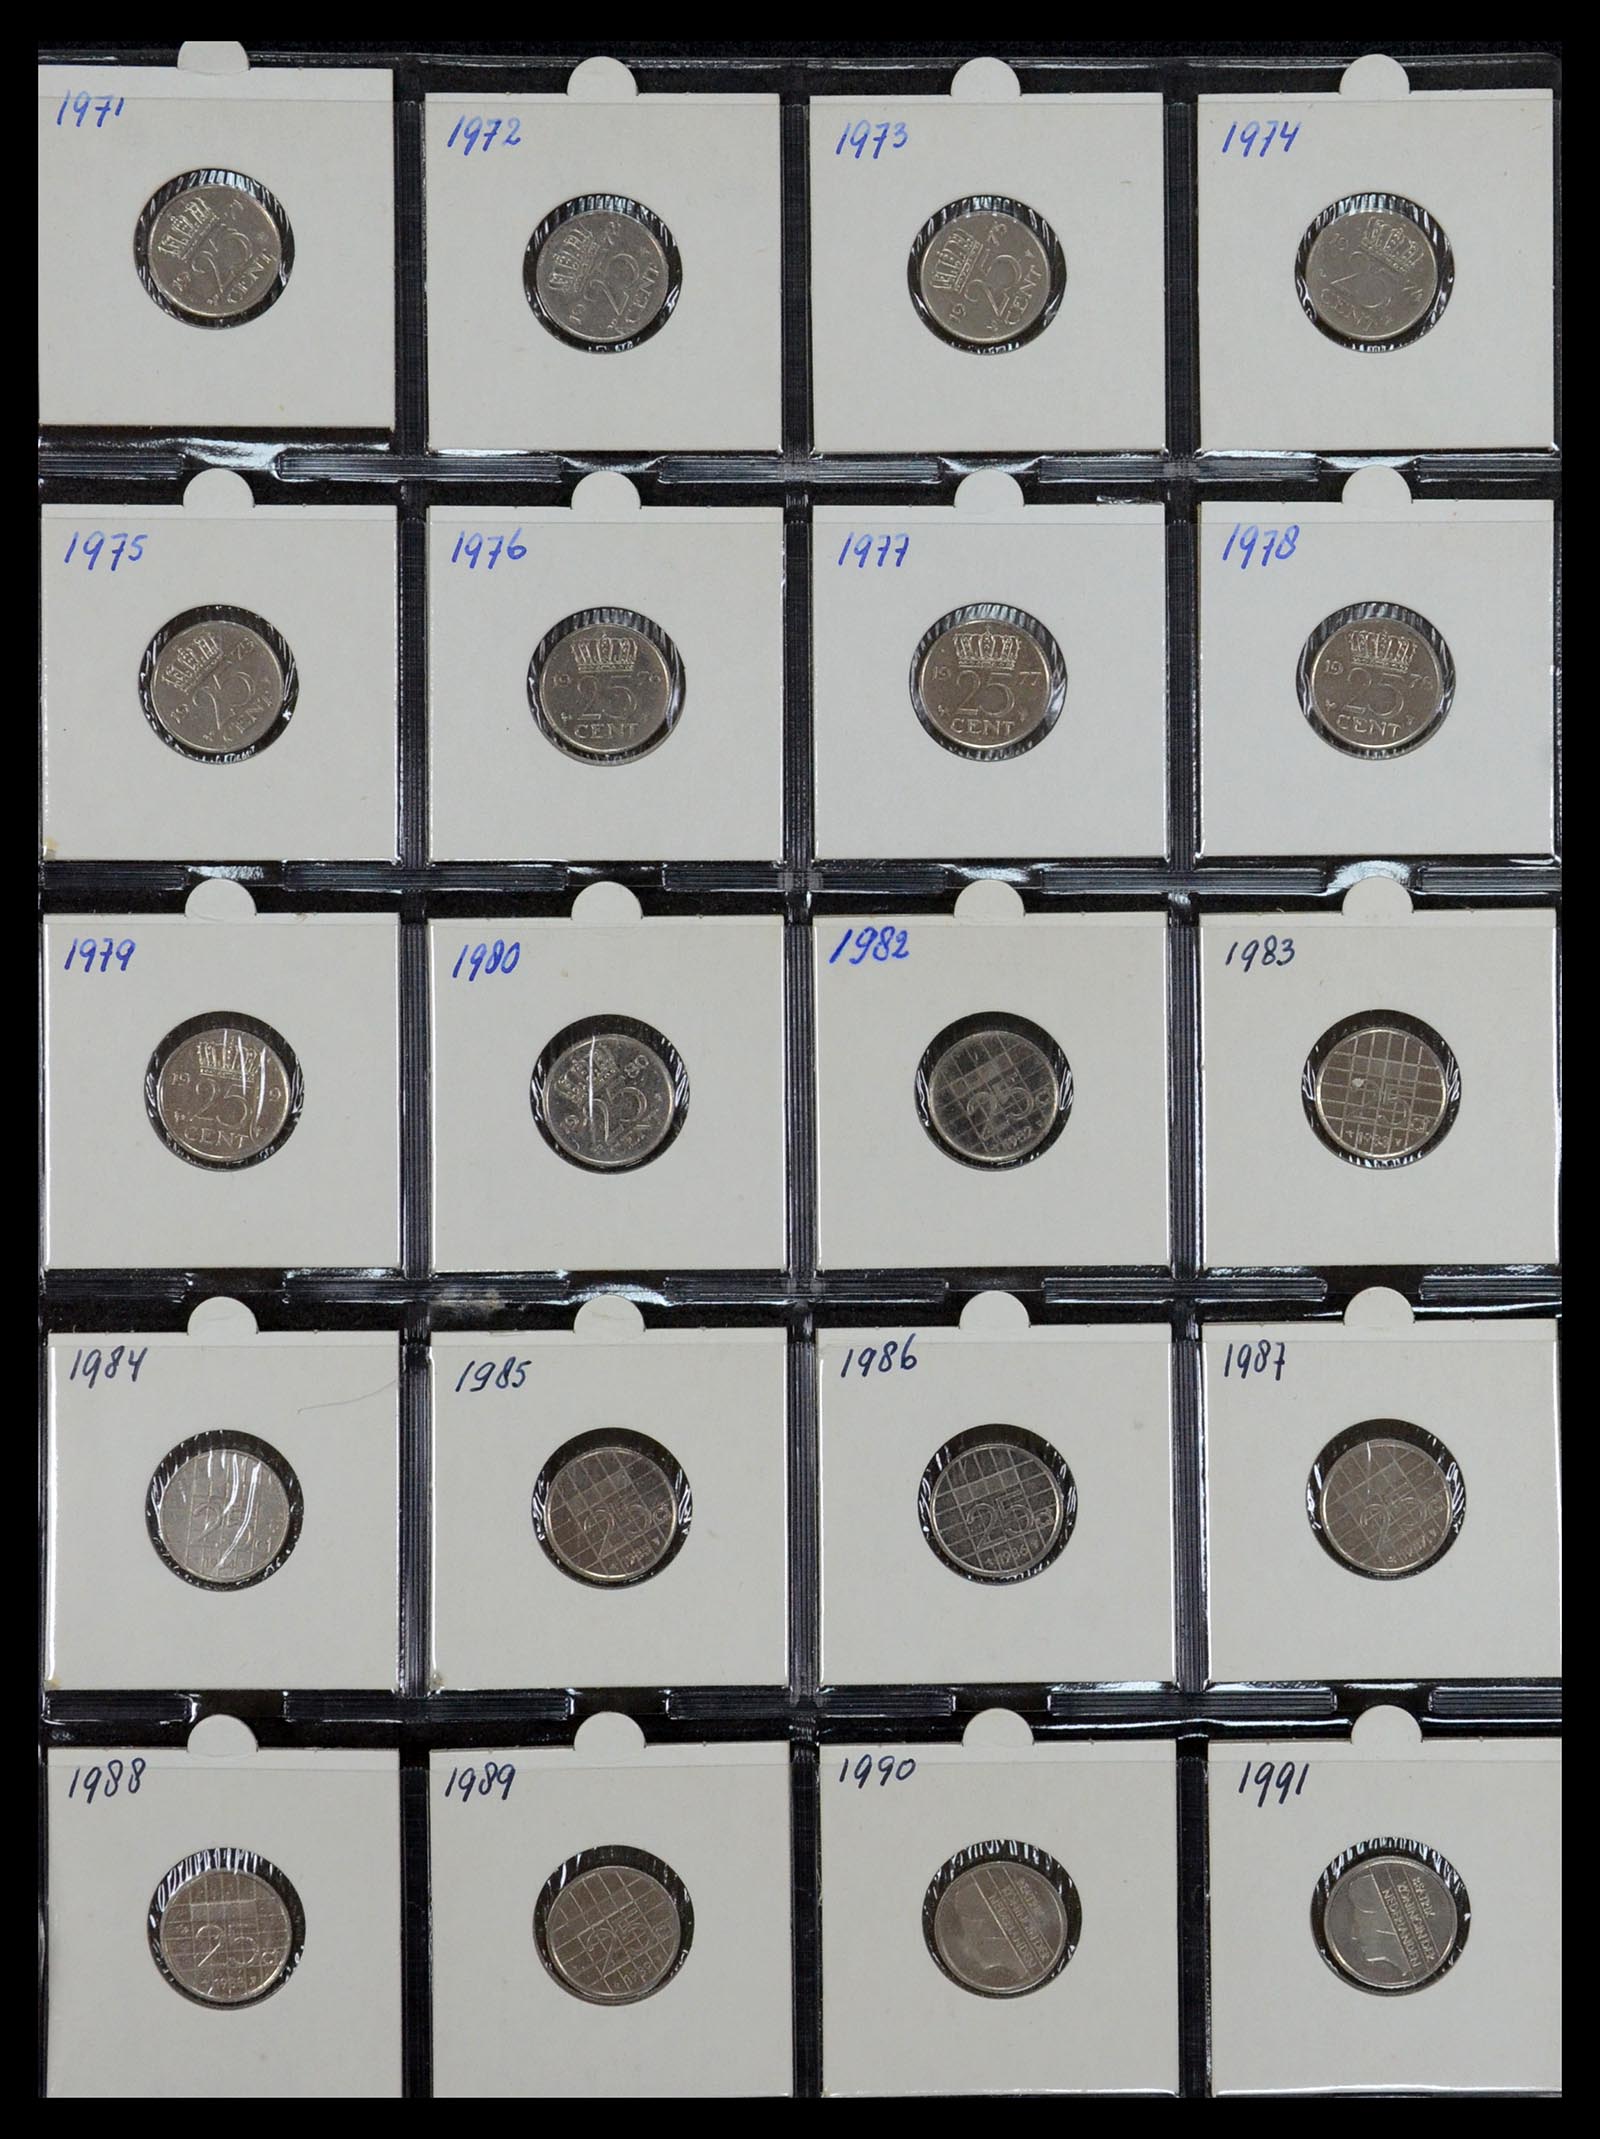 35379 019 - Stamp Collection 35379 Netherlands coins 1948-2001.